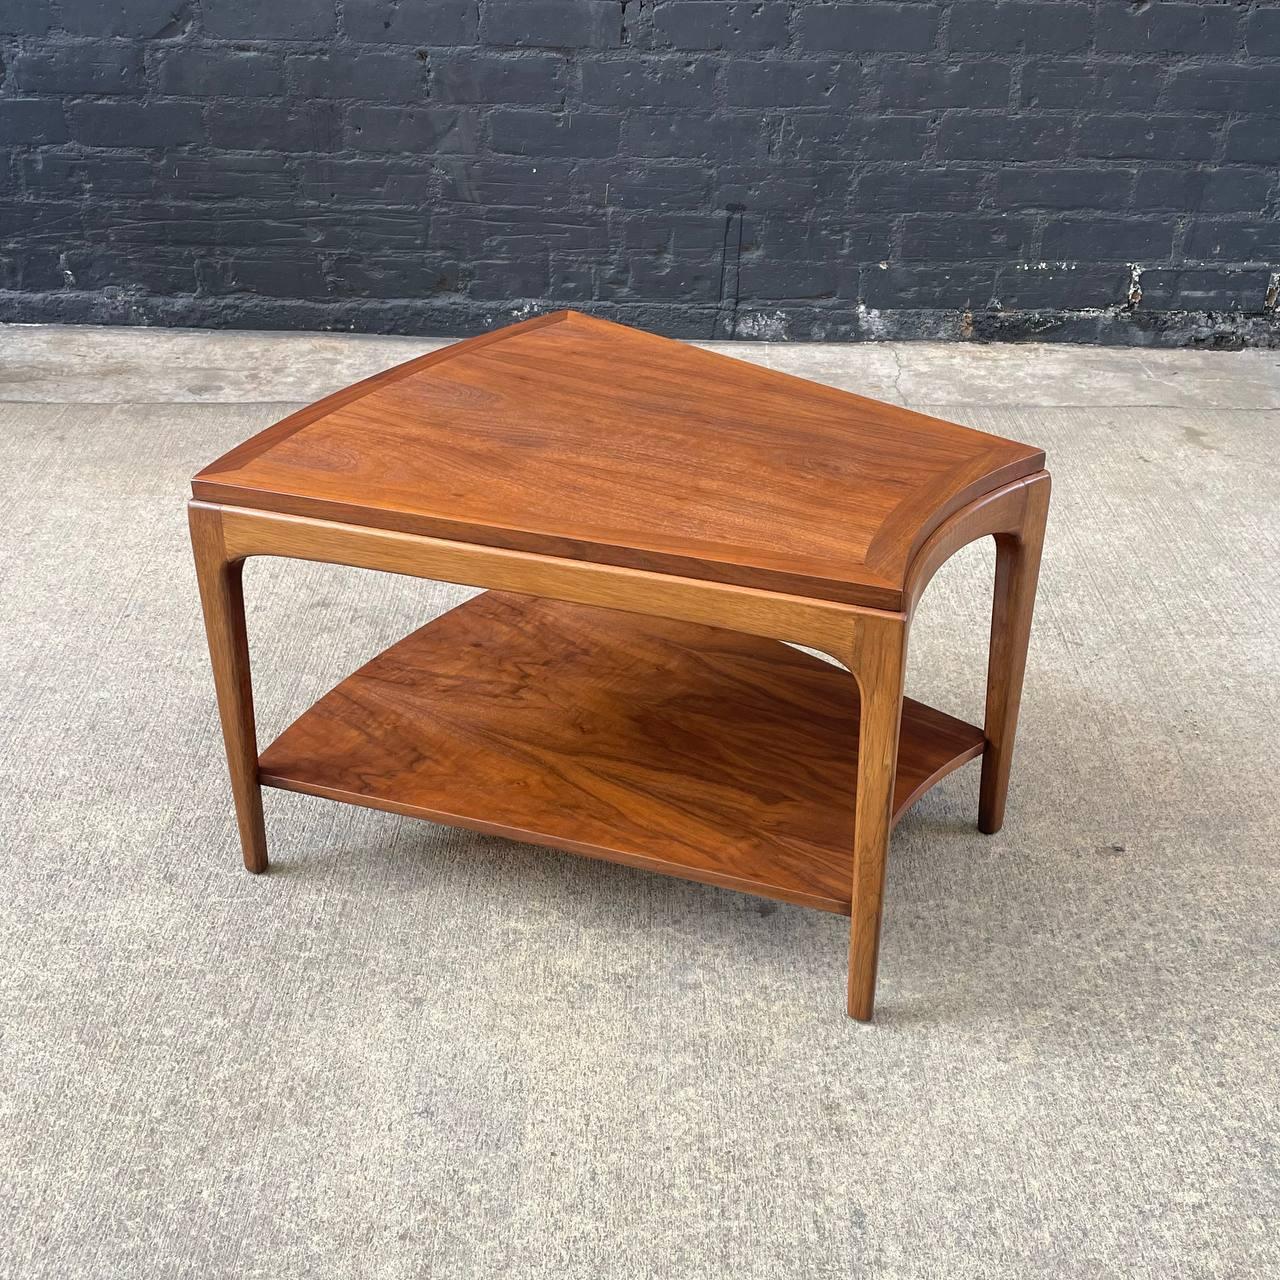 Newly Refinished - Mid-Century Modern Walnut Two-Tier Side Table by Lane

With over 15 years of experience, our workshop has followed a careful process of restoration, showcasing our passion and creativity for vintage designs that can seamlessly be